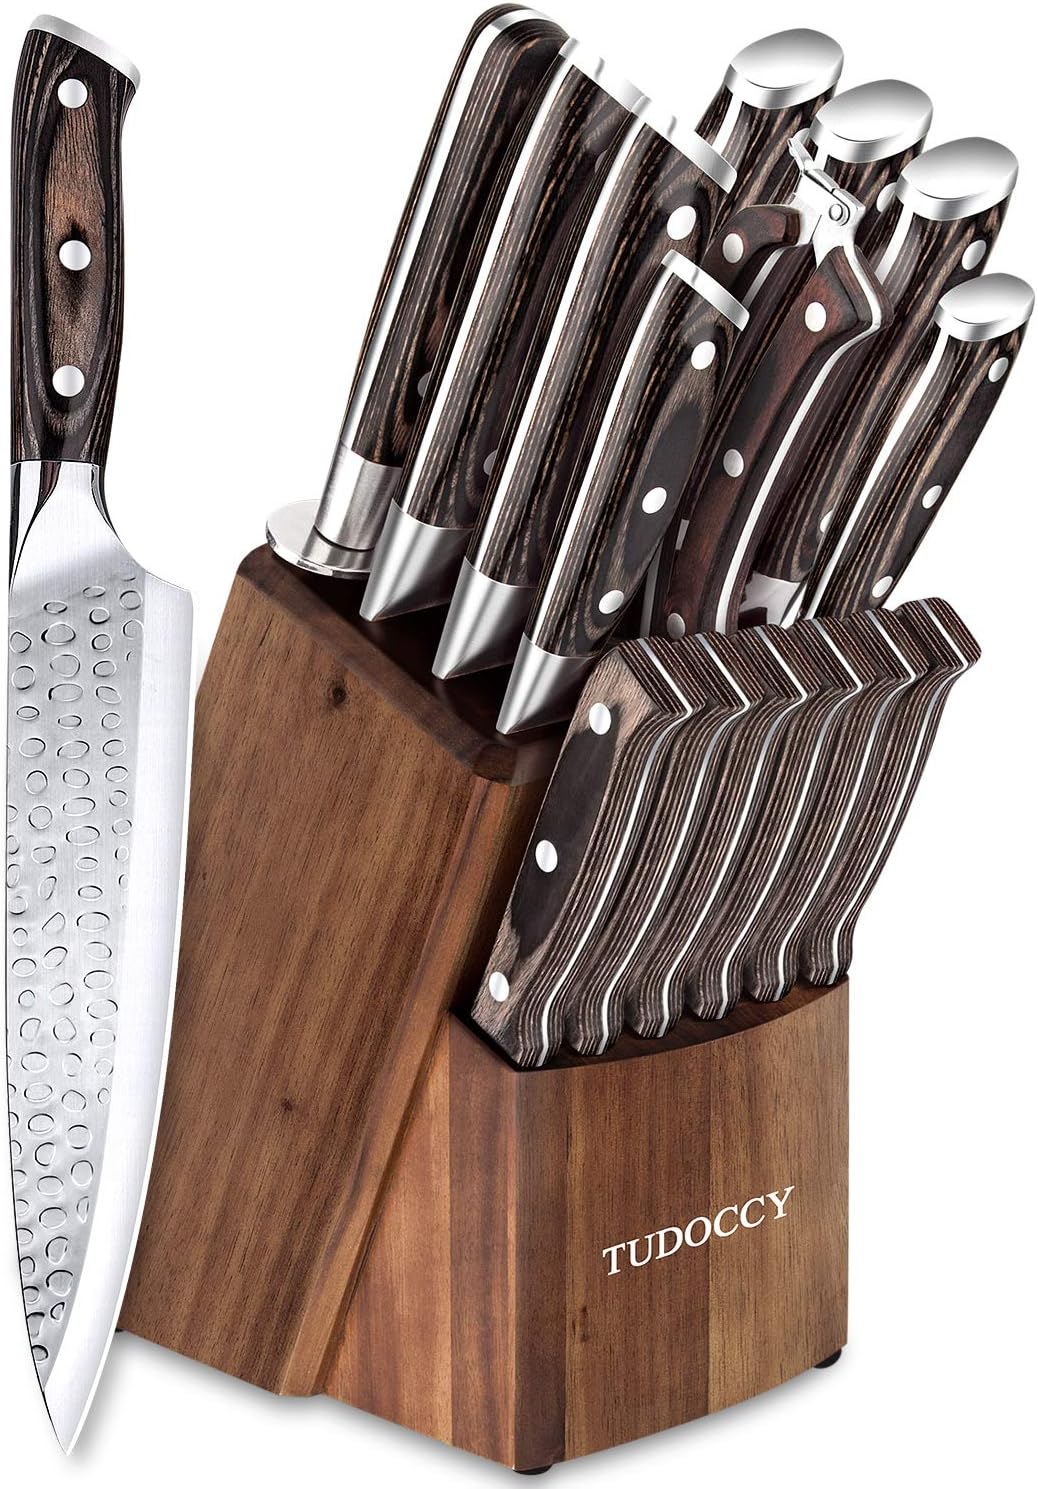 KD 16 pcs Knife Set with Built-in Sharpener and Wooden Block